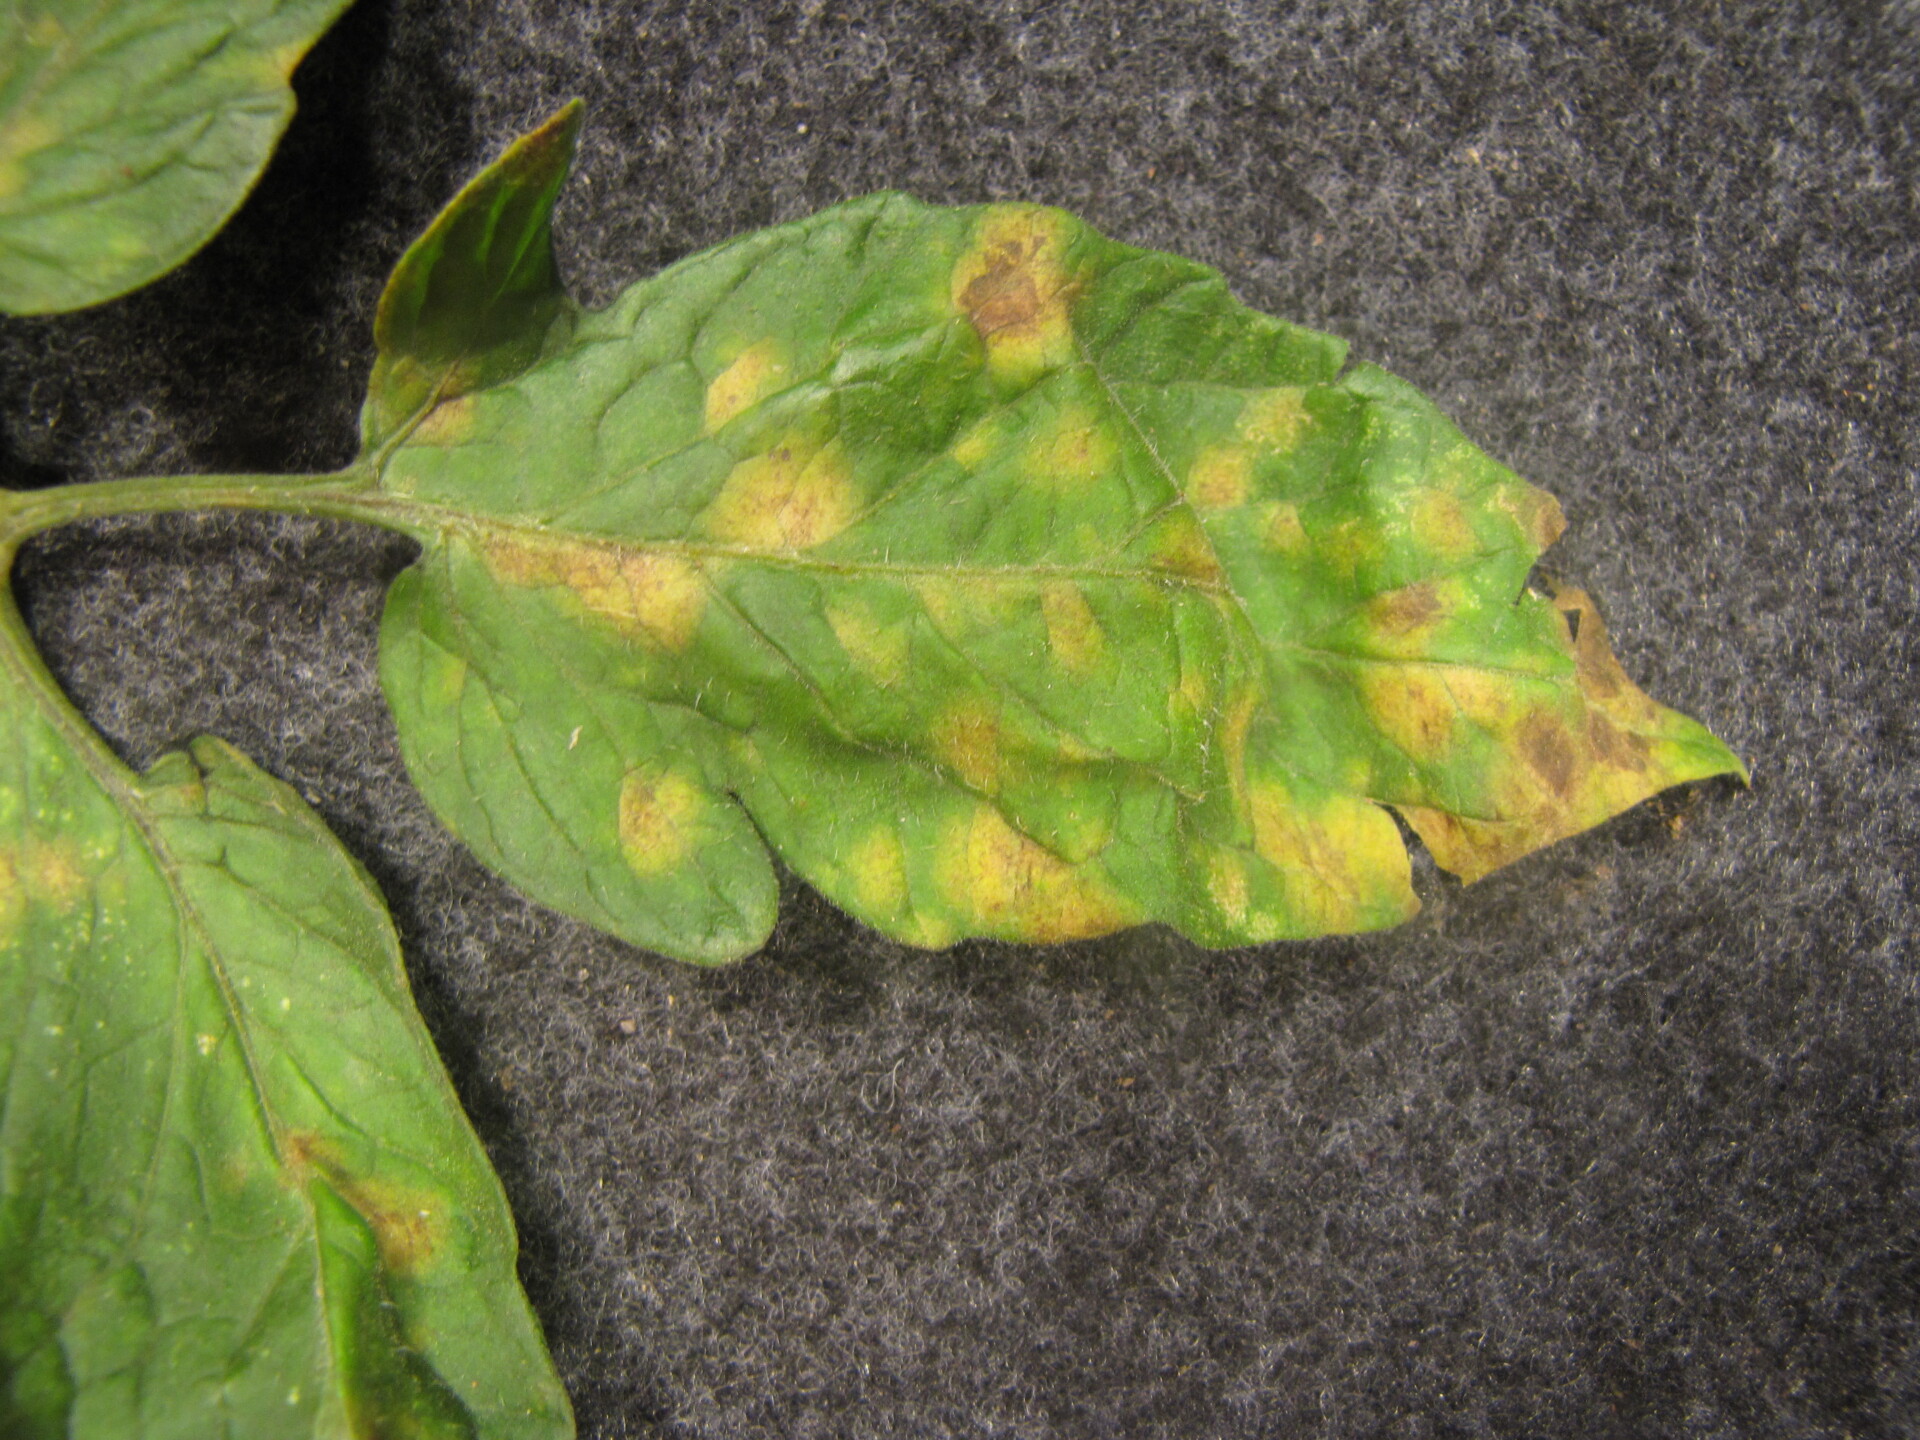 Figure 3. Cercospora leaf mold of tomato. Note that smaller lesions are chlorotic while larger lesions have become necrotic.